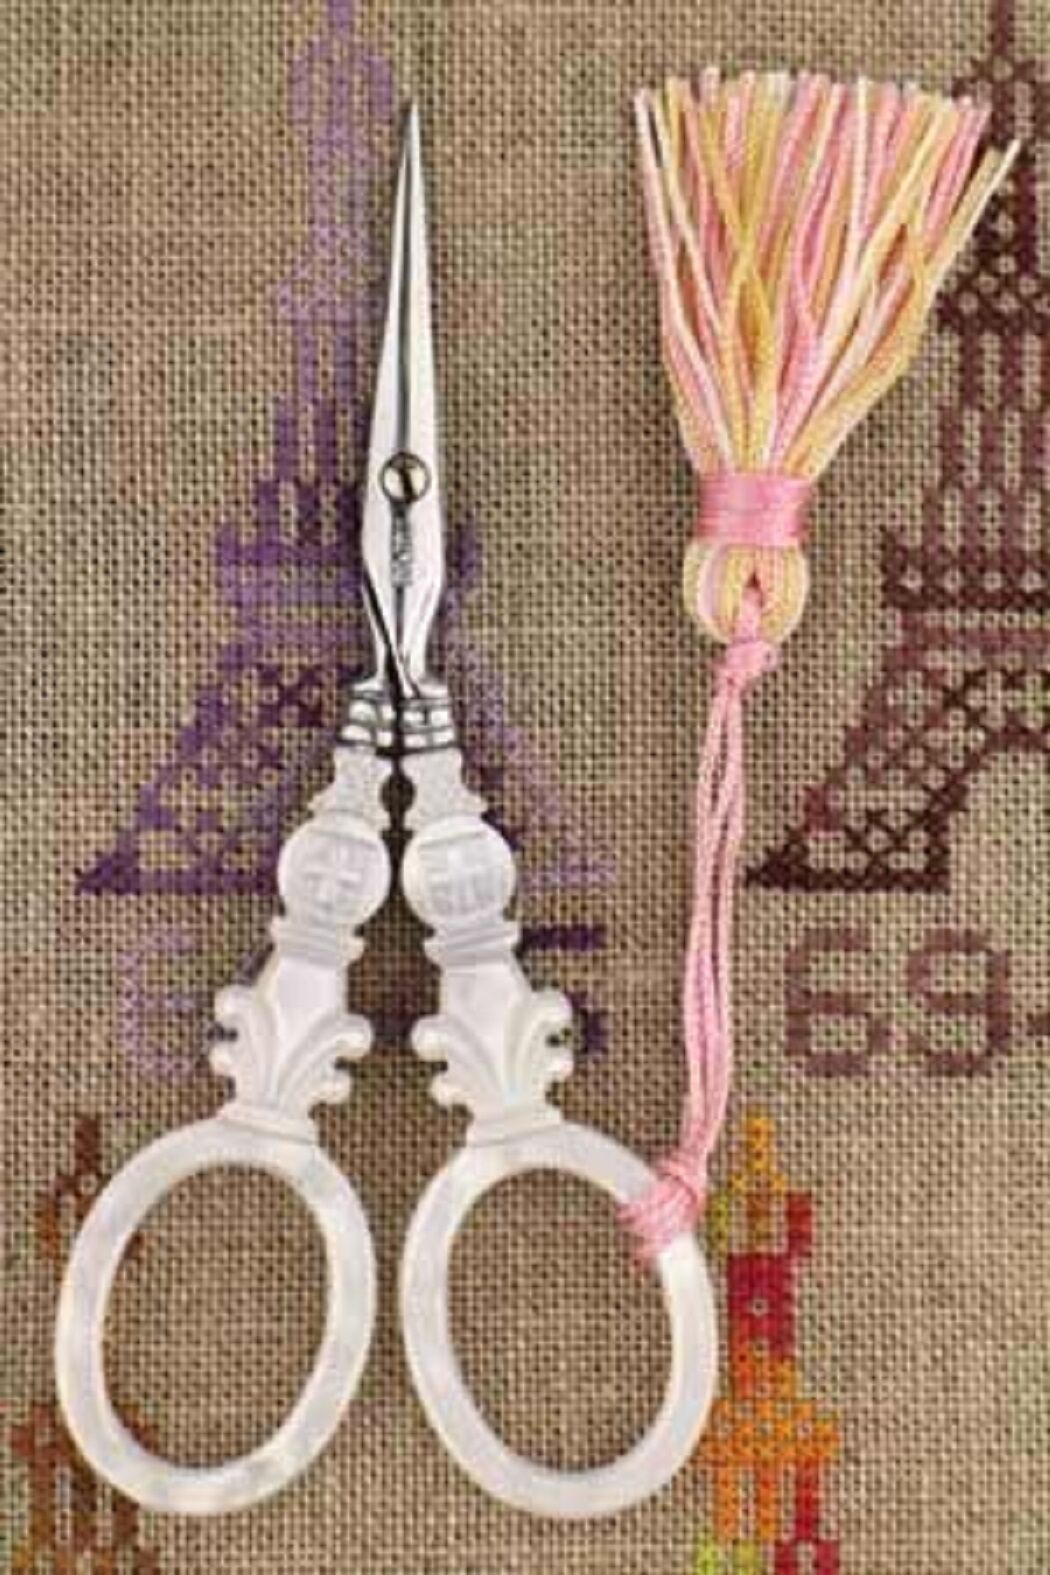 Embroidery Scissors Sajou Cross Motif Mother Of Pearl 4-1/2"